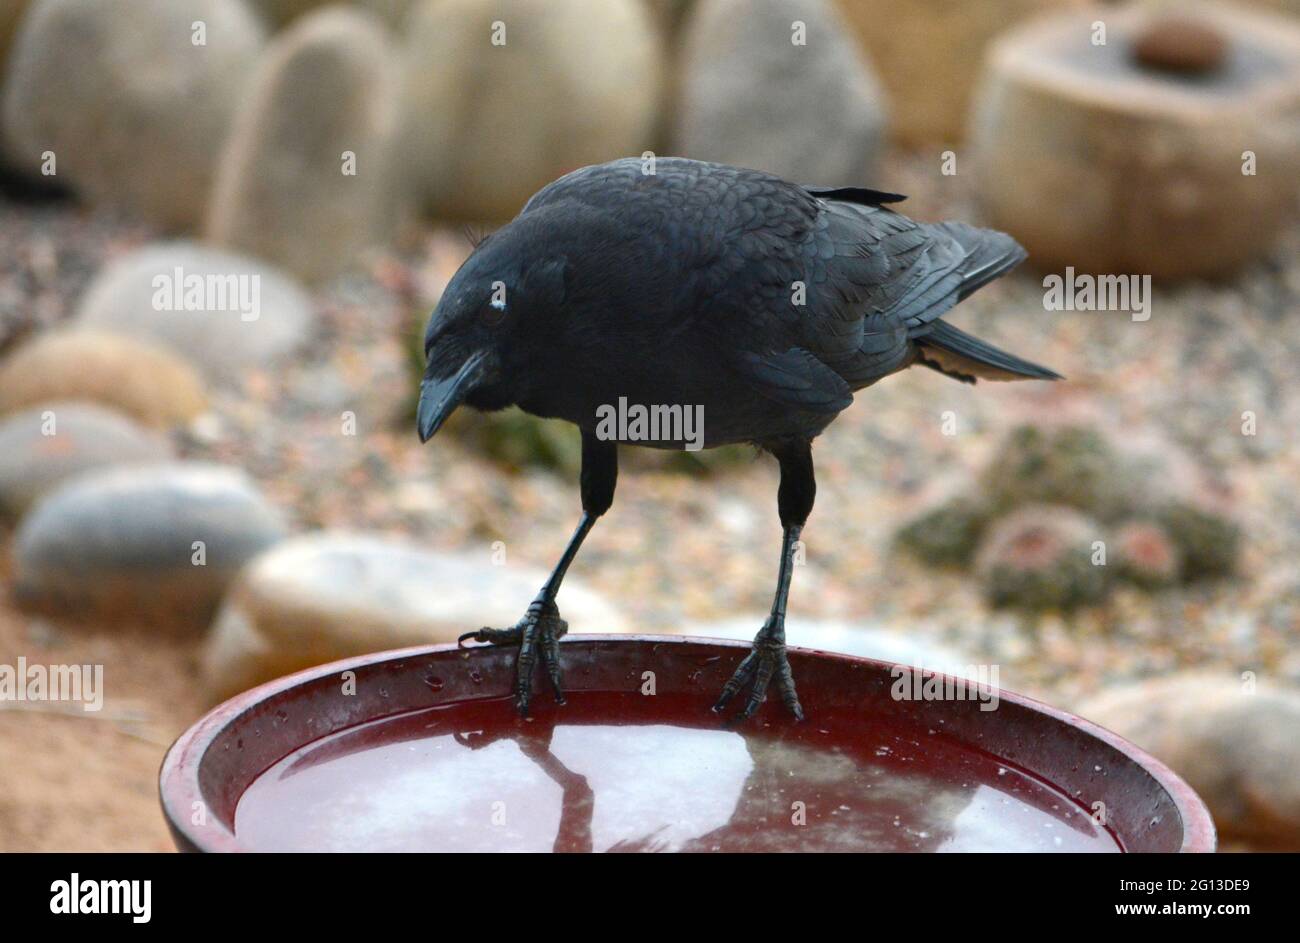 A common raven (Corvus corax) drinks from a backyard bird bath in New Mexico. Stock Photo